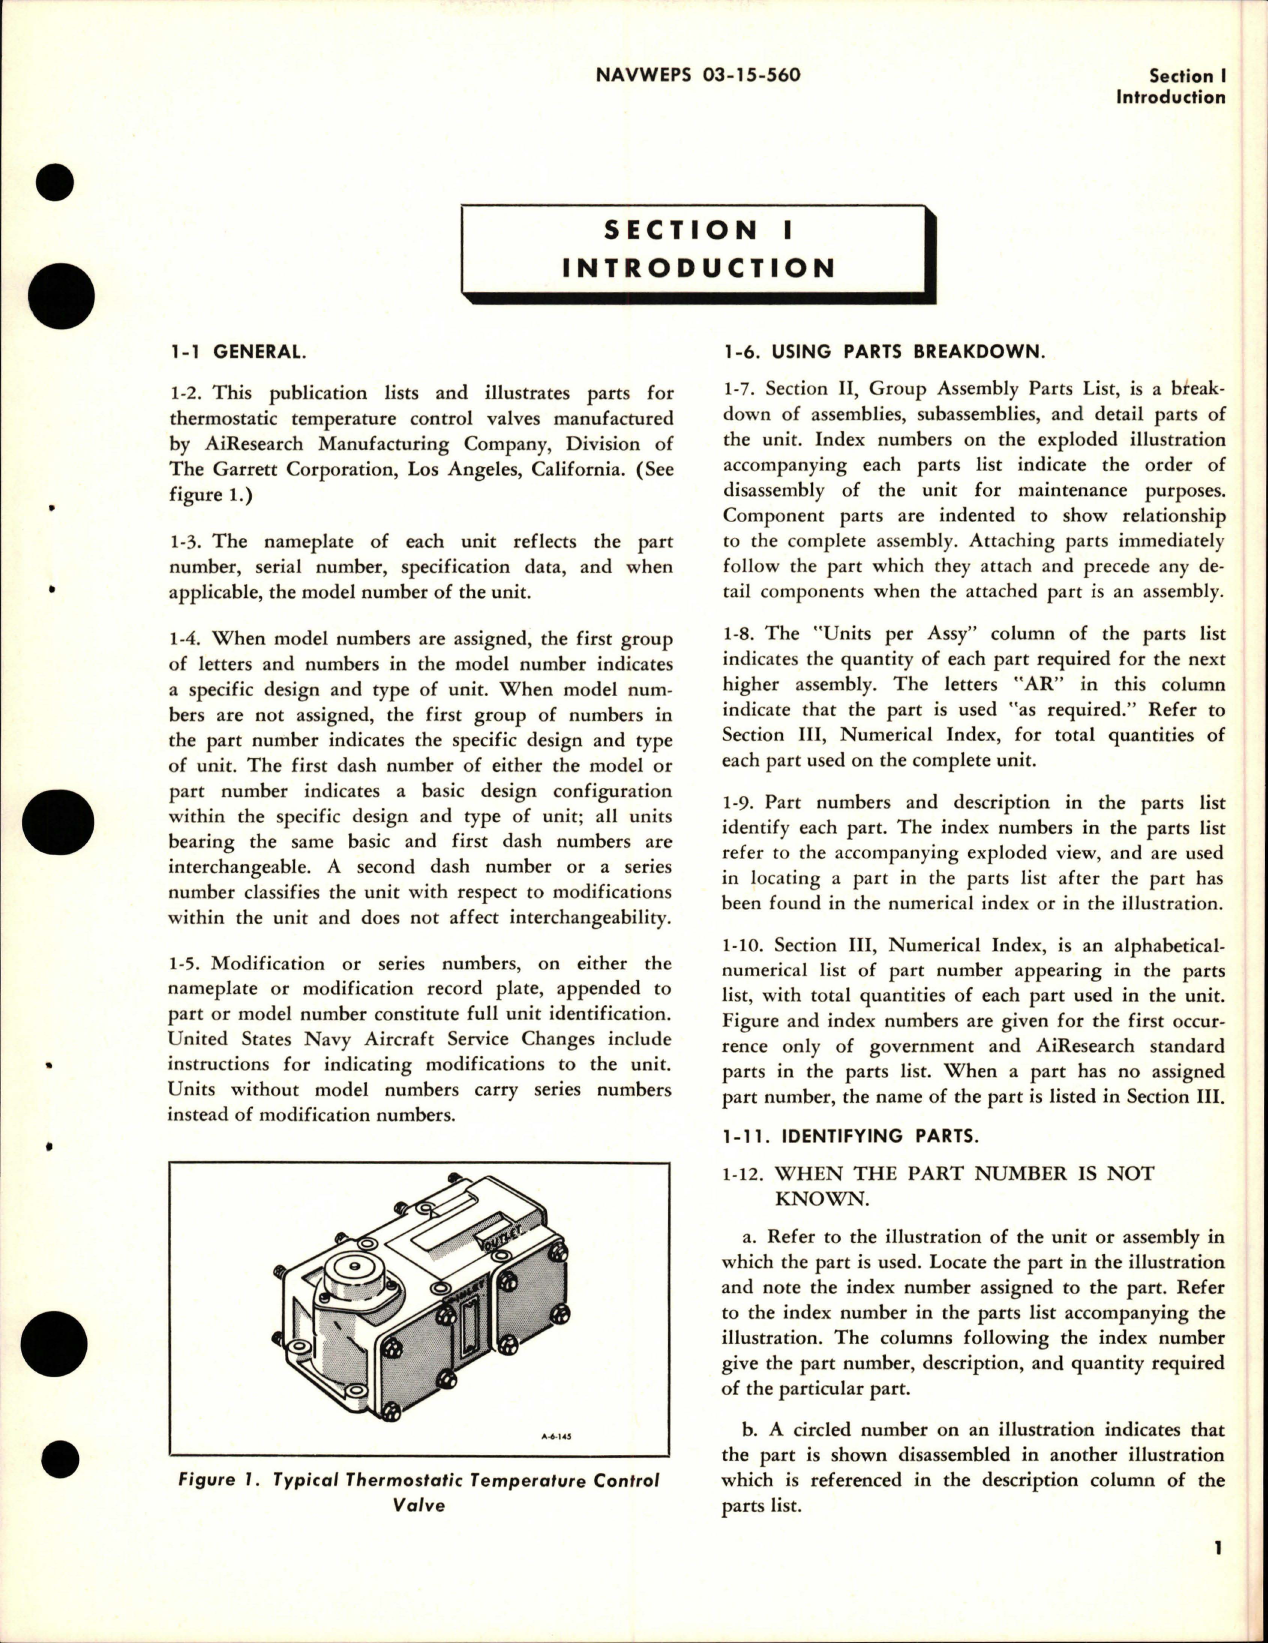 Sample page 5 from AirCorps Library document: Parts Breakdown for Thermostatic Temperature Control Valves